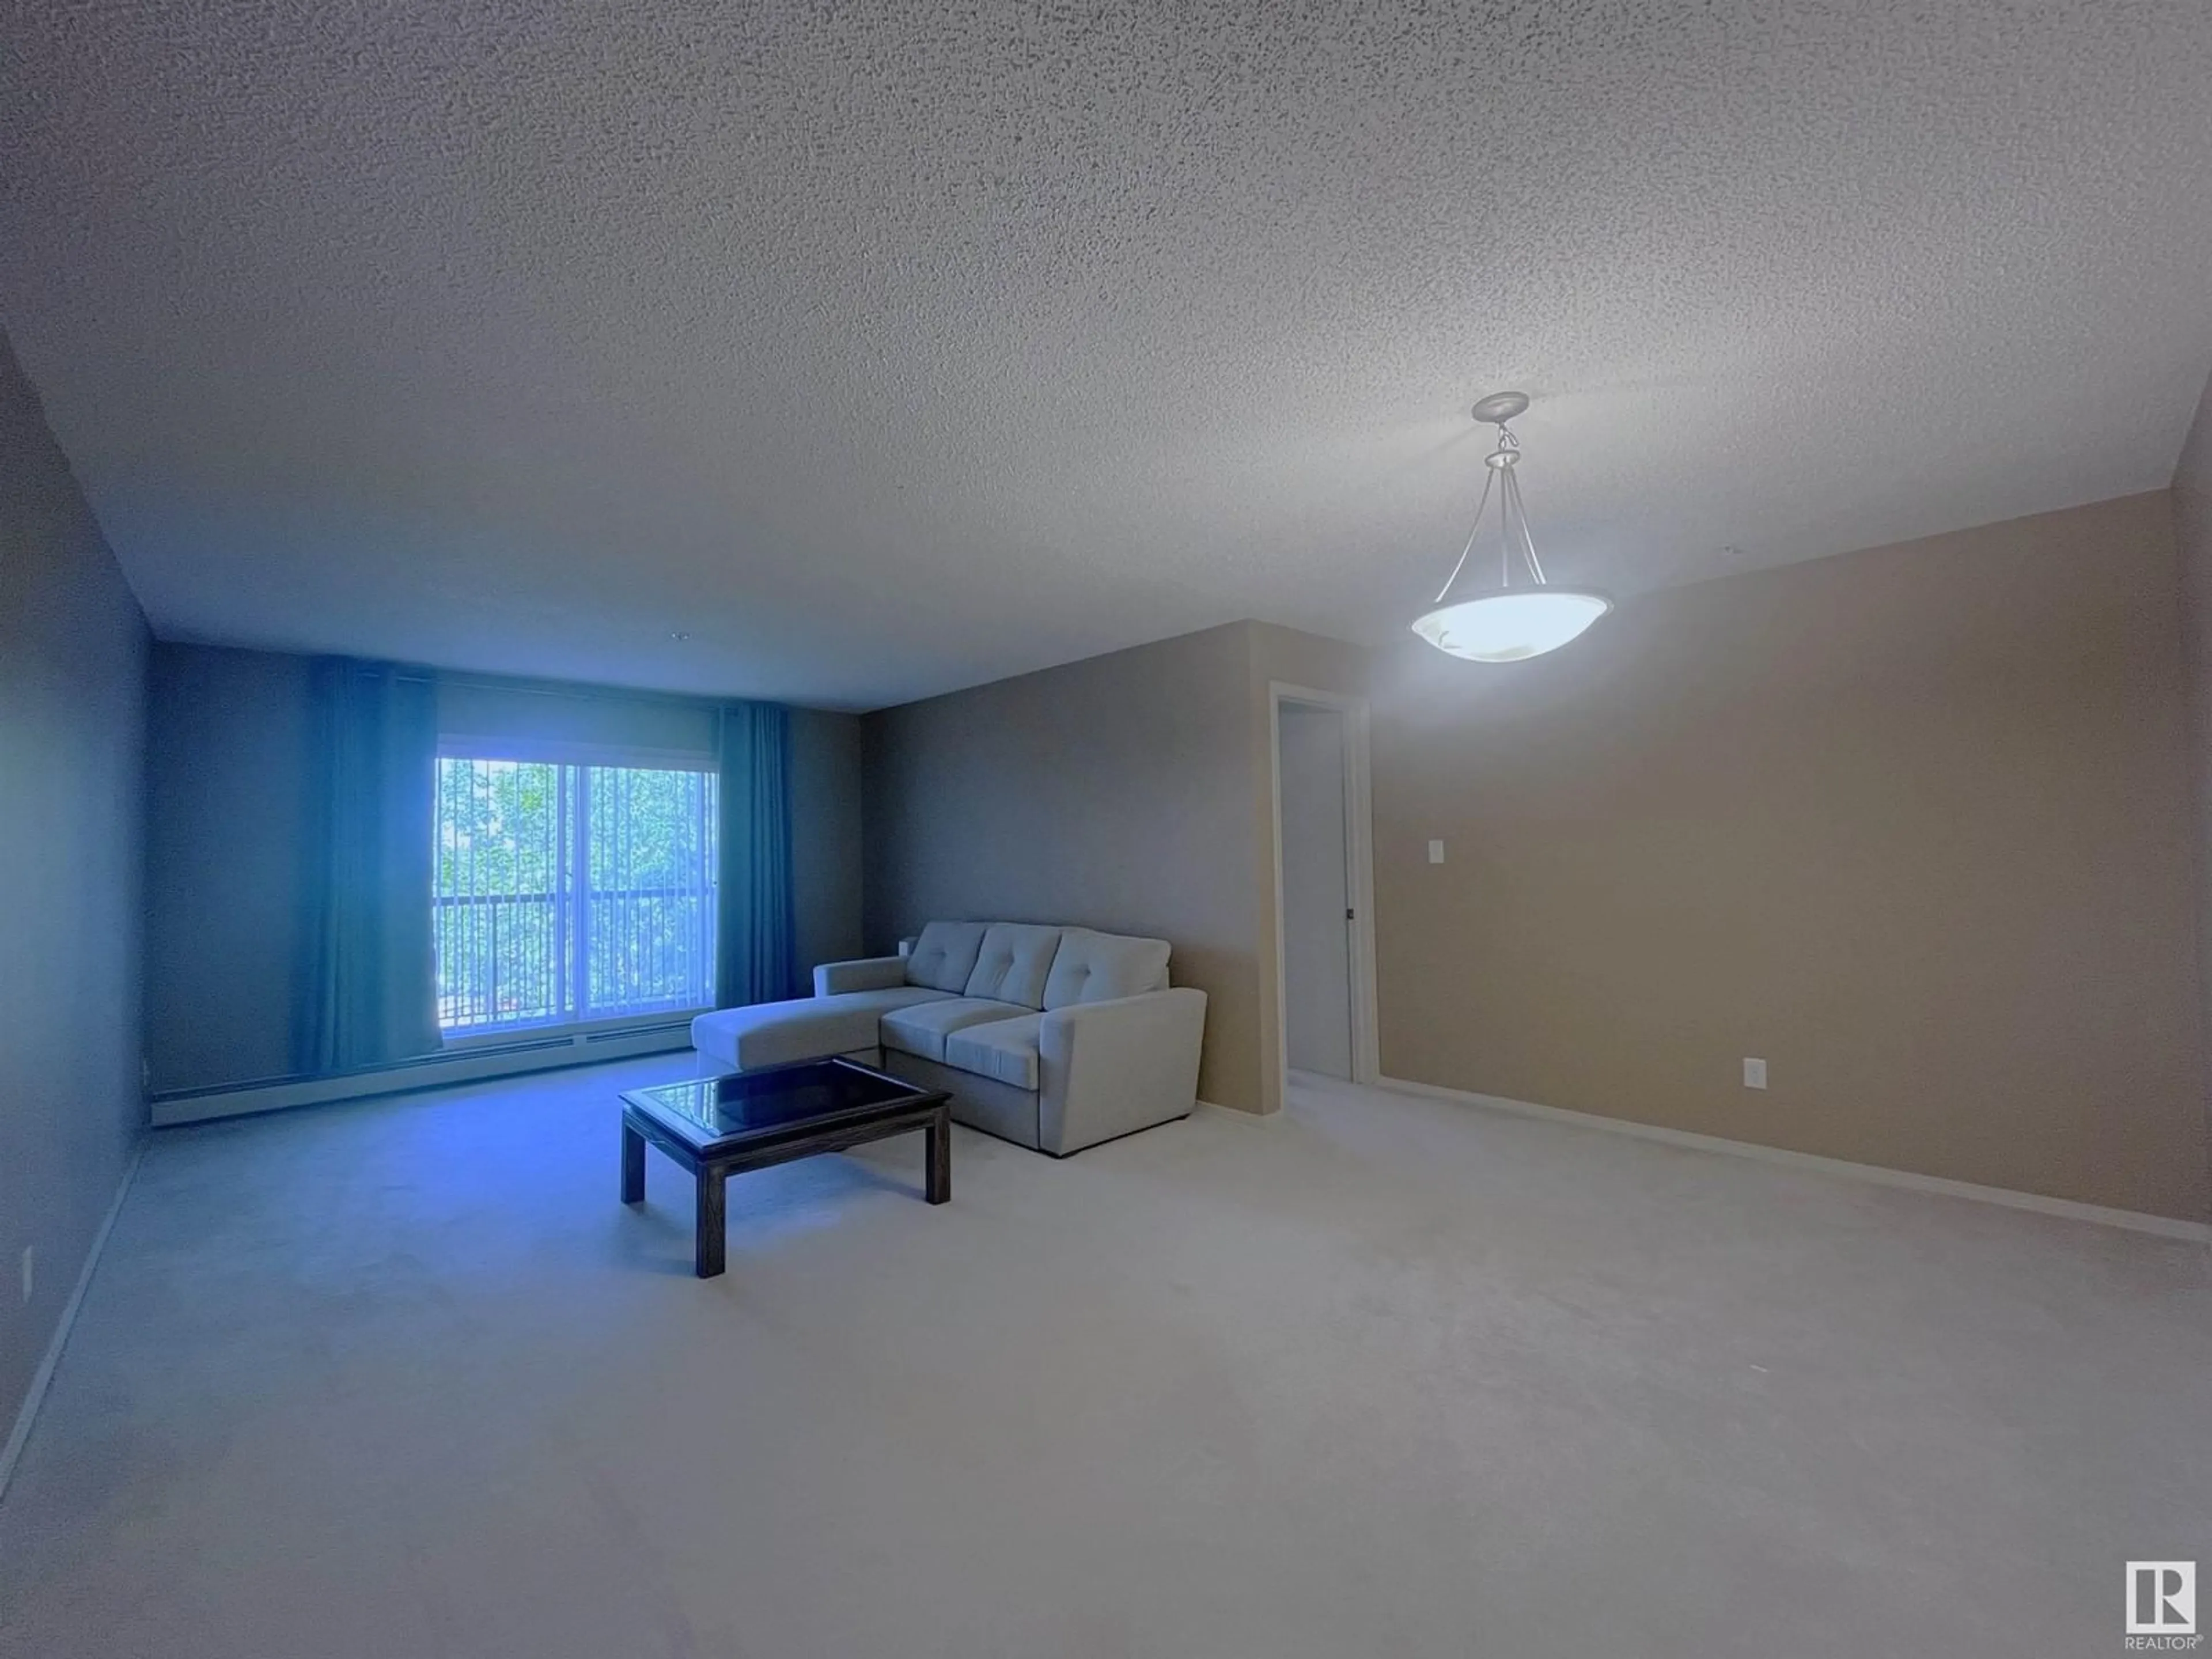 A pic of a room for #335 2436 GUARDIAN RD NW, Edmonton Alberta T5T2P5